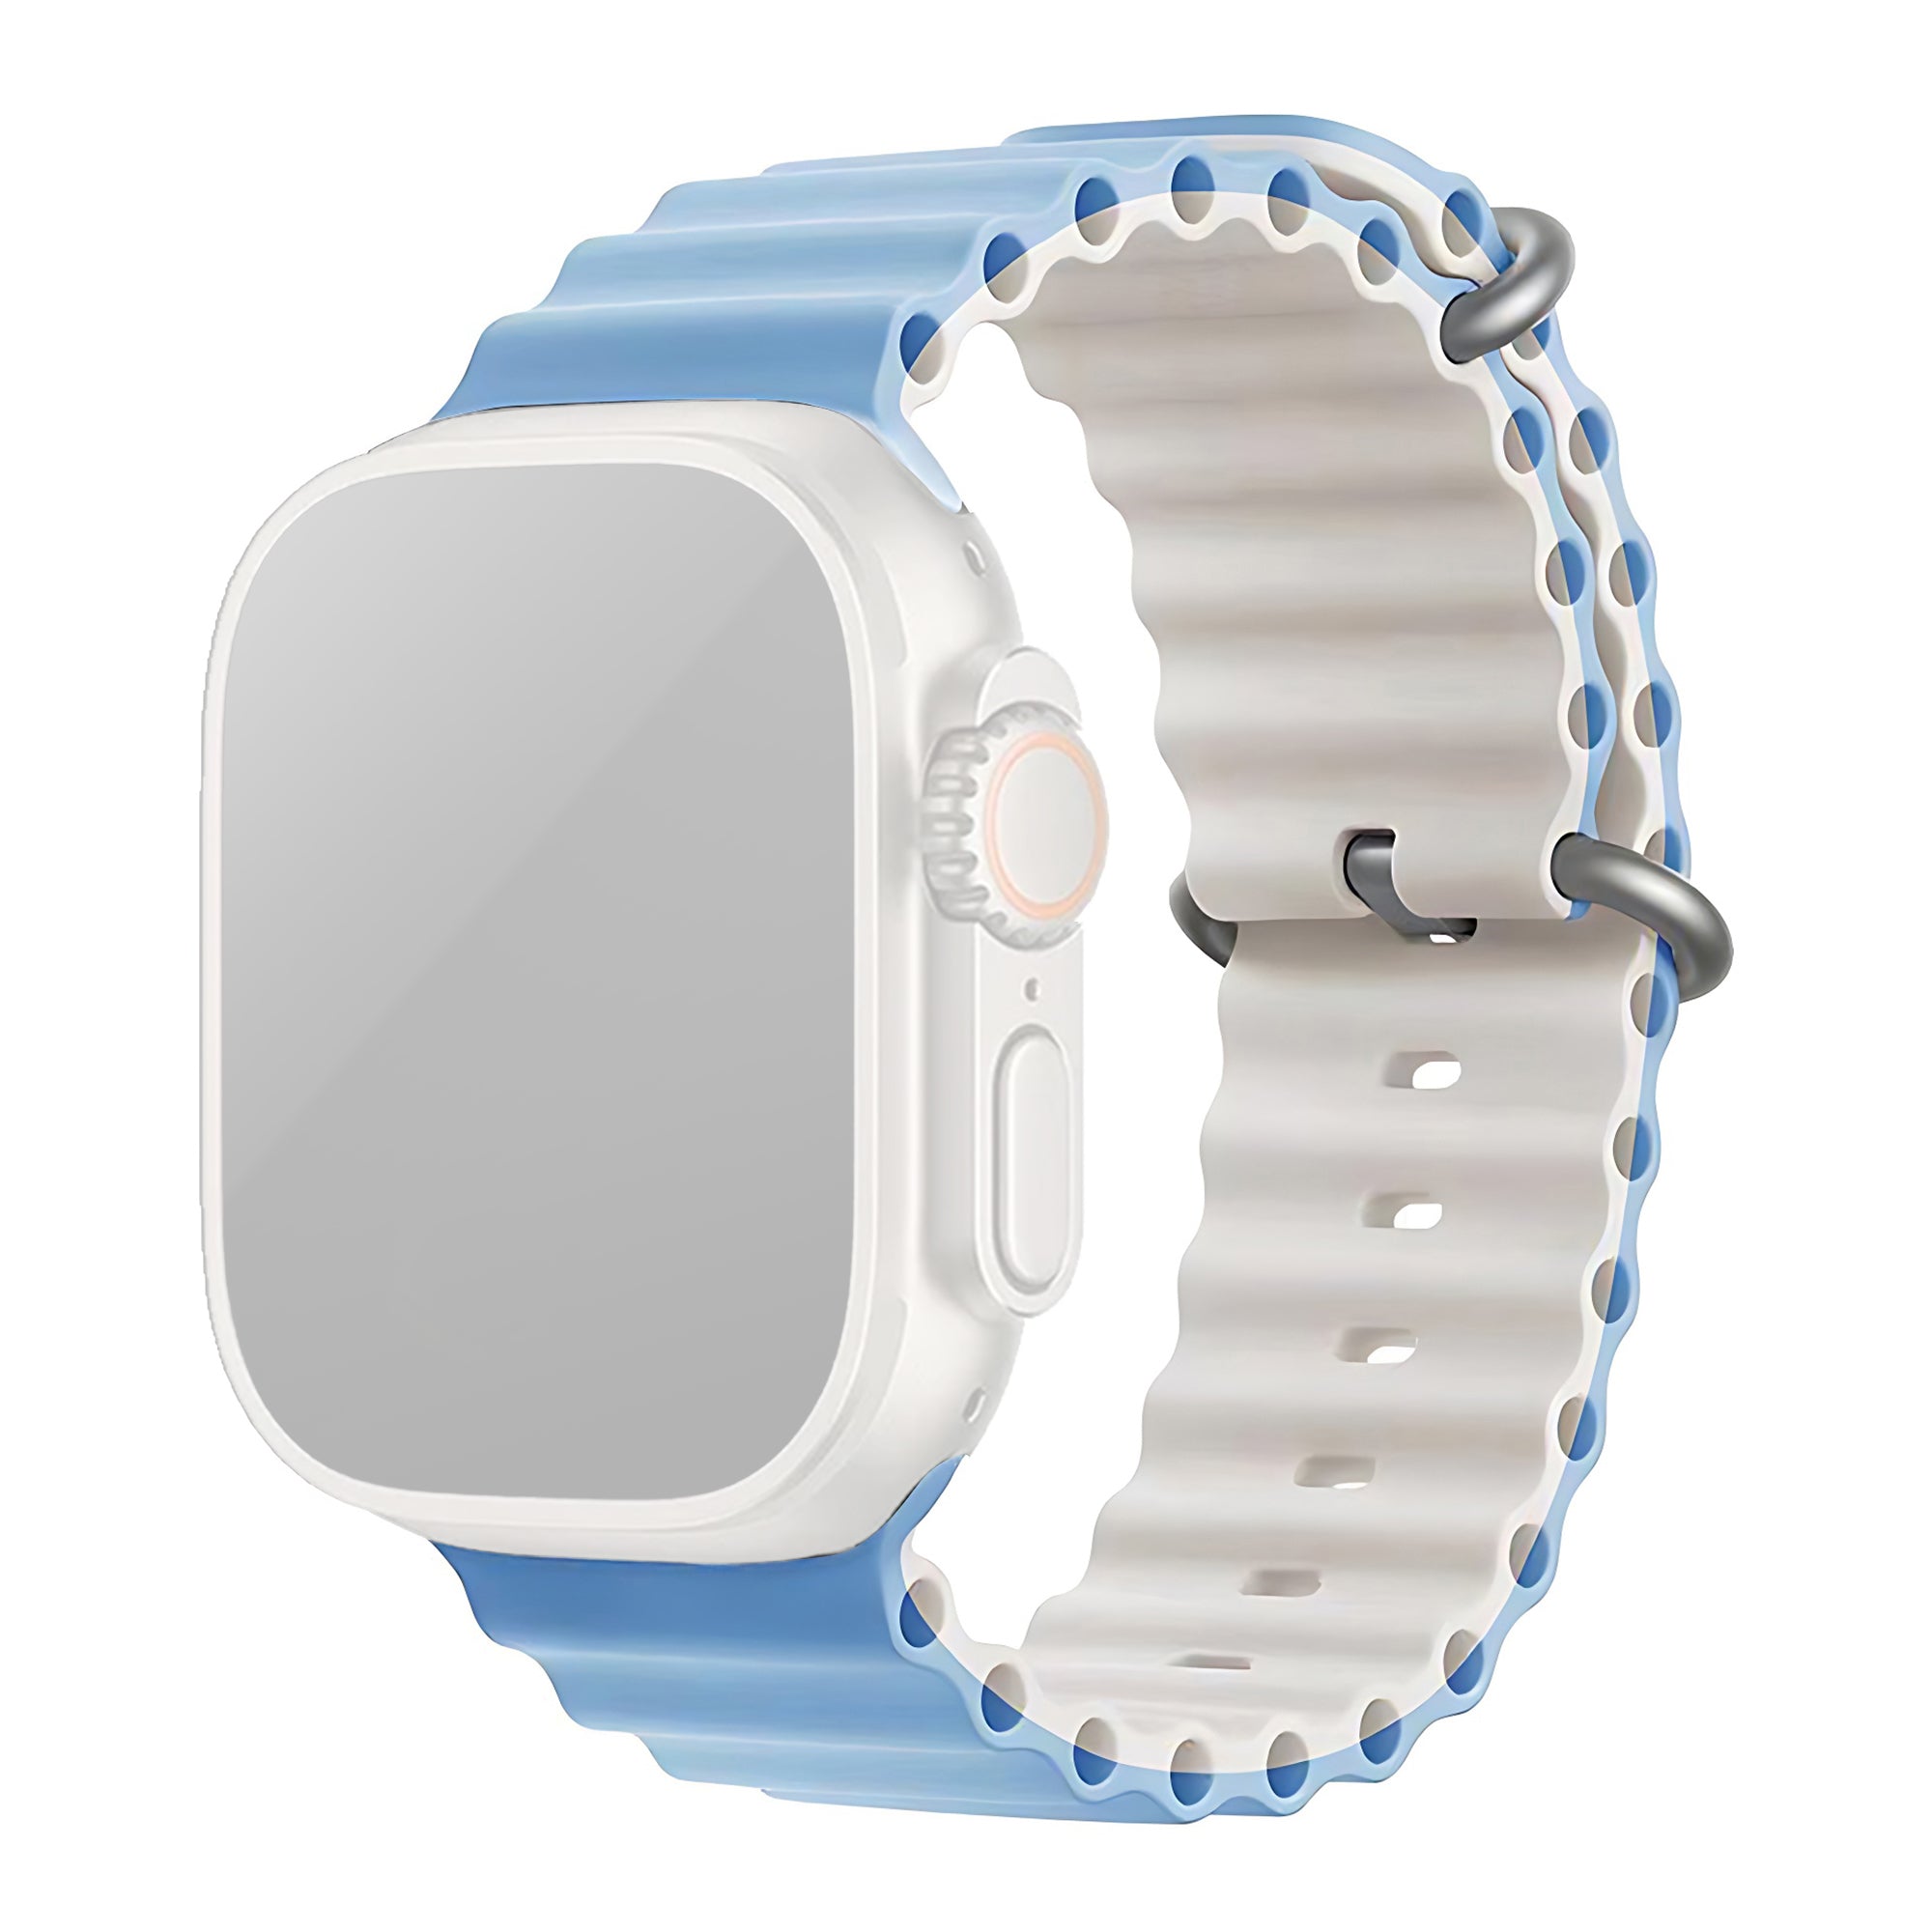 Silicone Ocean Loop Strap for - Apple Watch 44mm - Blue & Gray